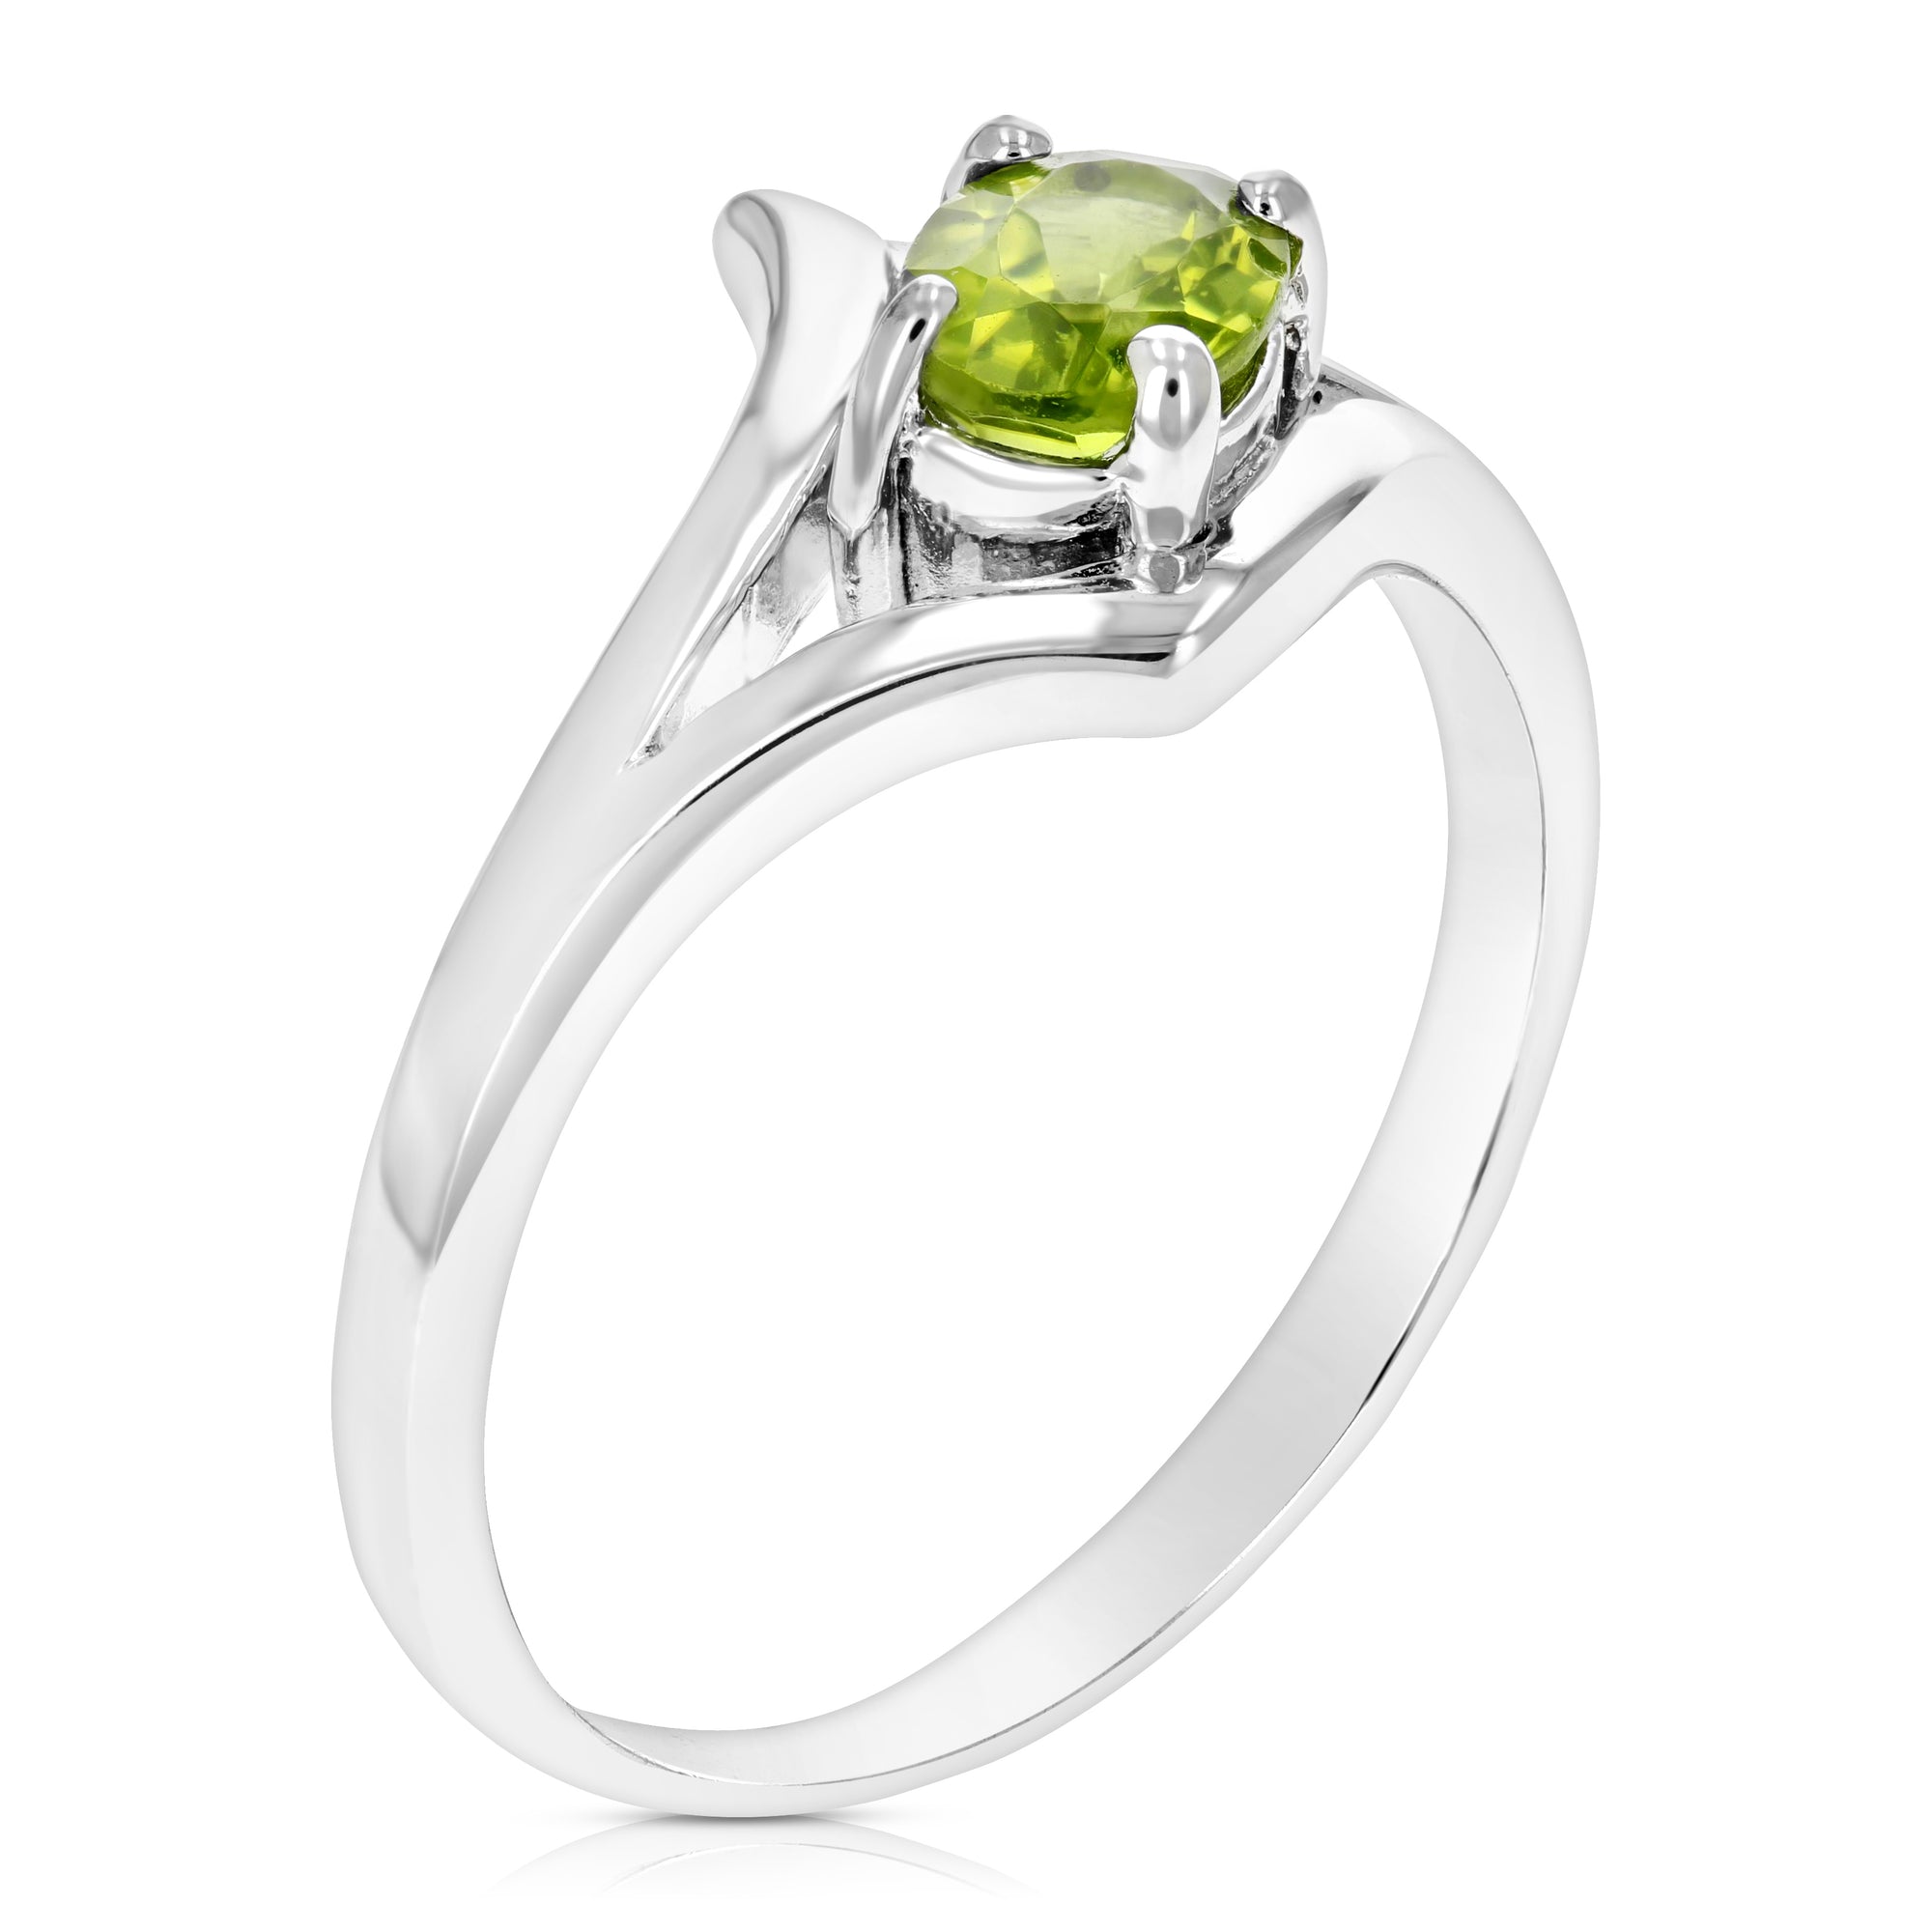 0.70 cttw Peridot Ring .925 Sterling Silver with Rhodium Plating Oval Solitaire